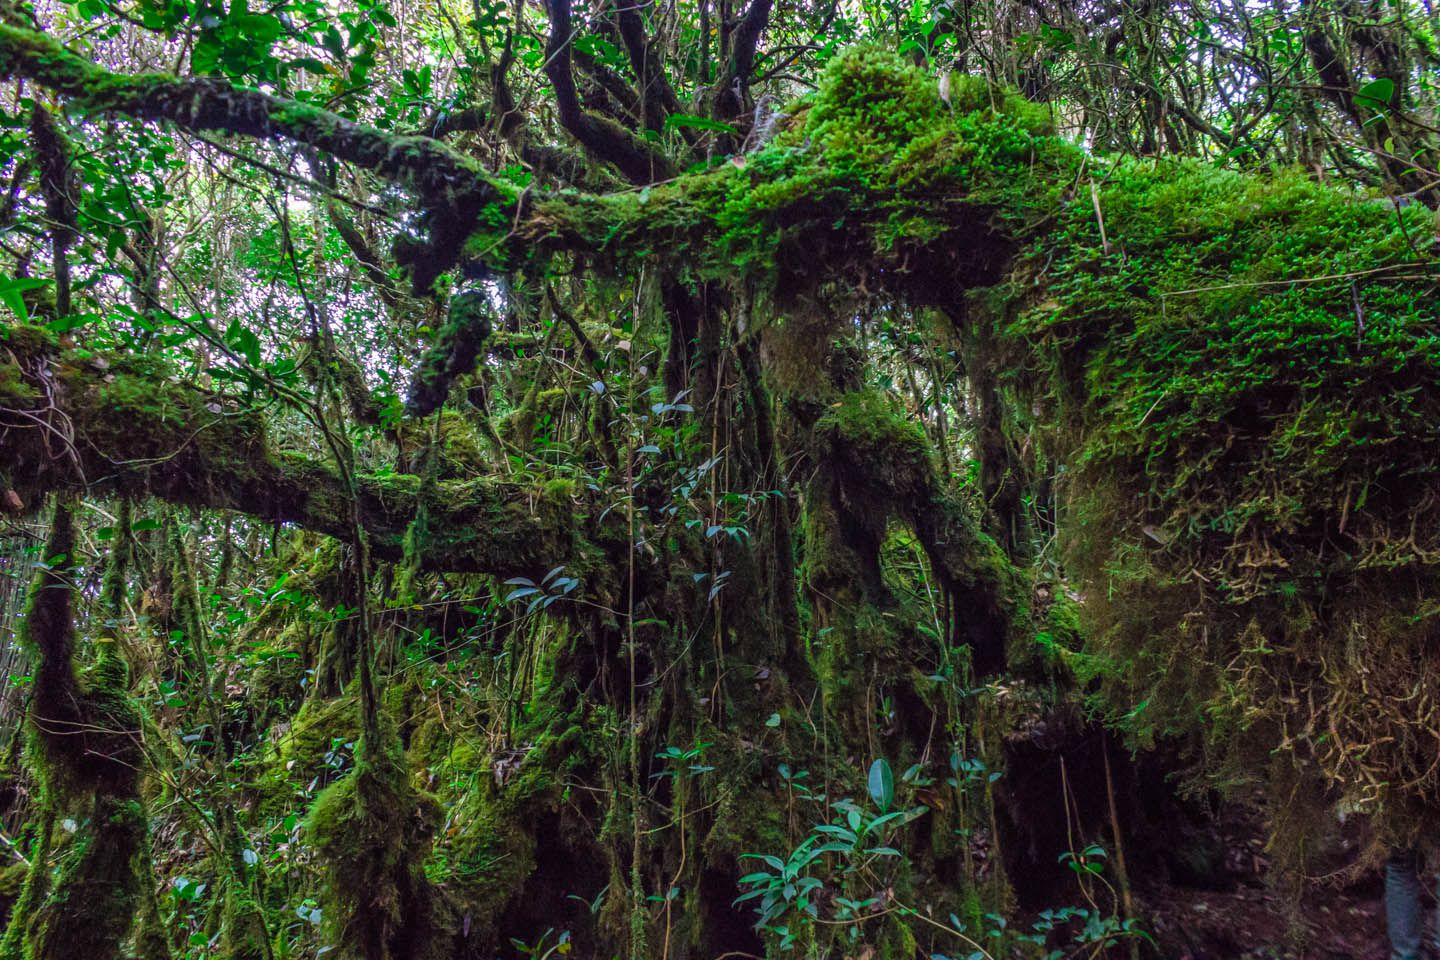 Moss covering the trees at the mossy forest, Cameron Highlands, Malaysia